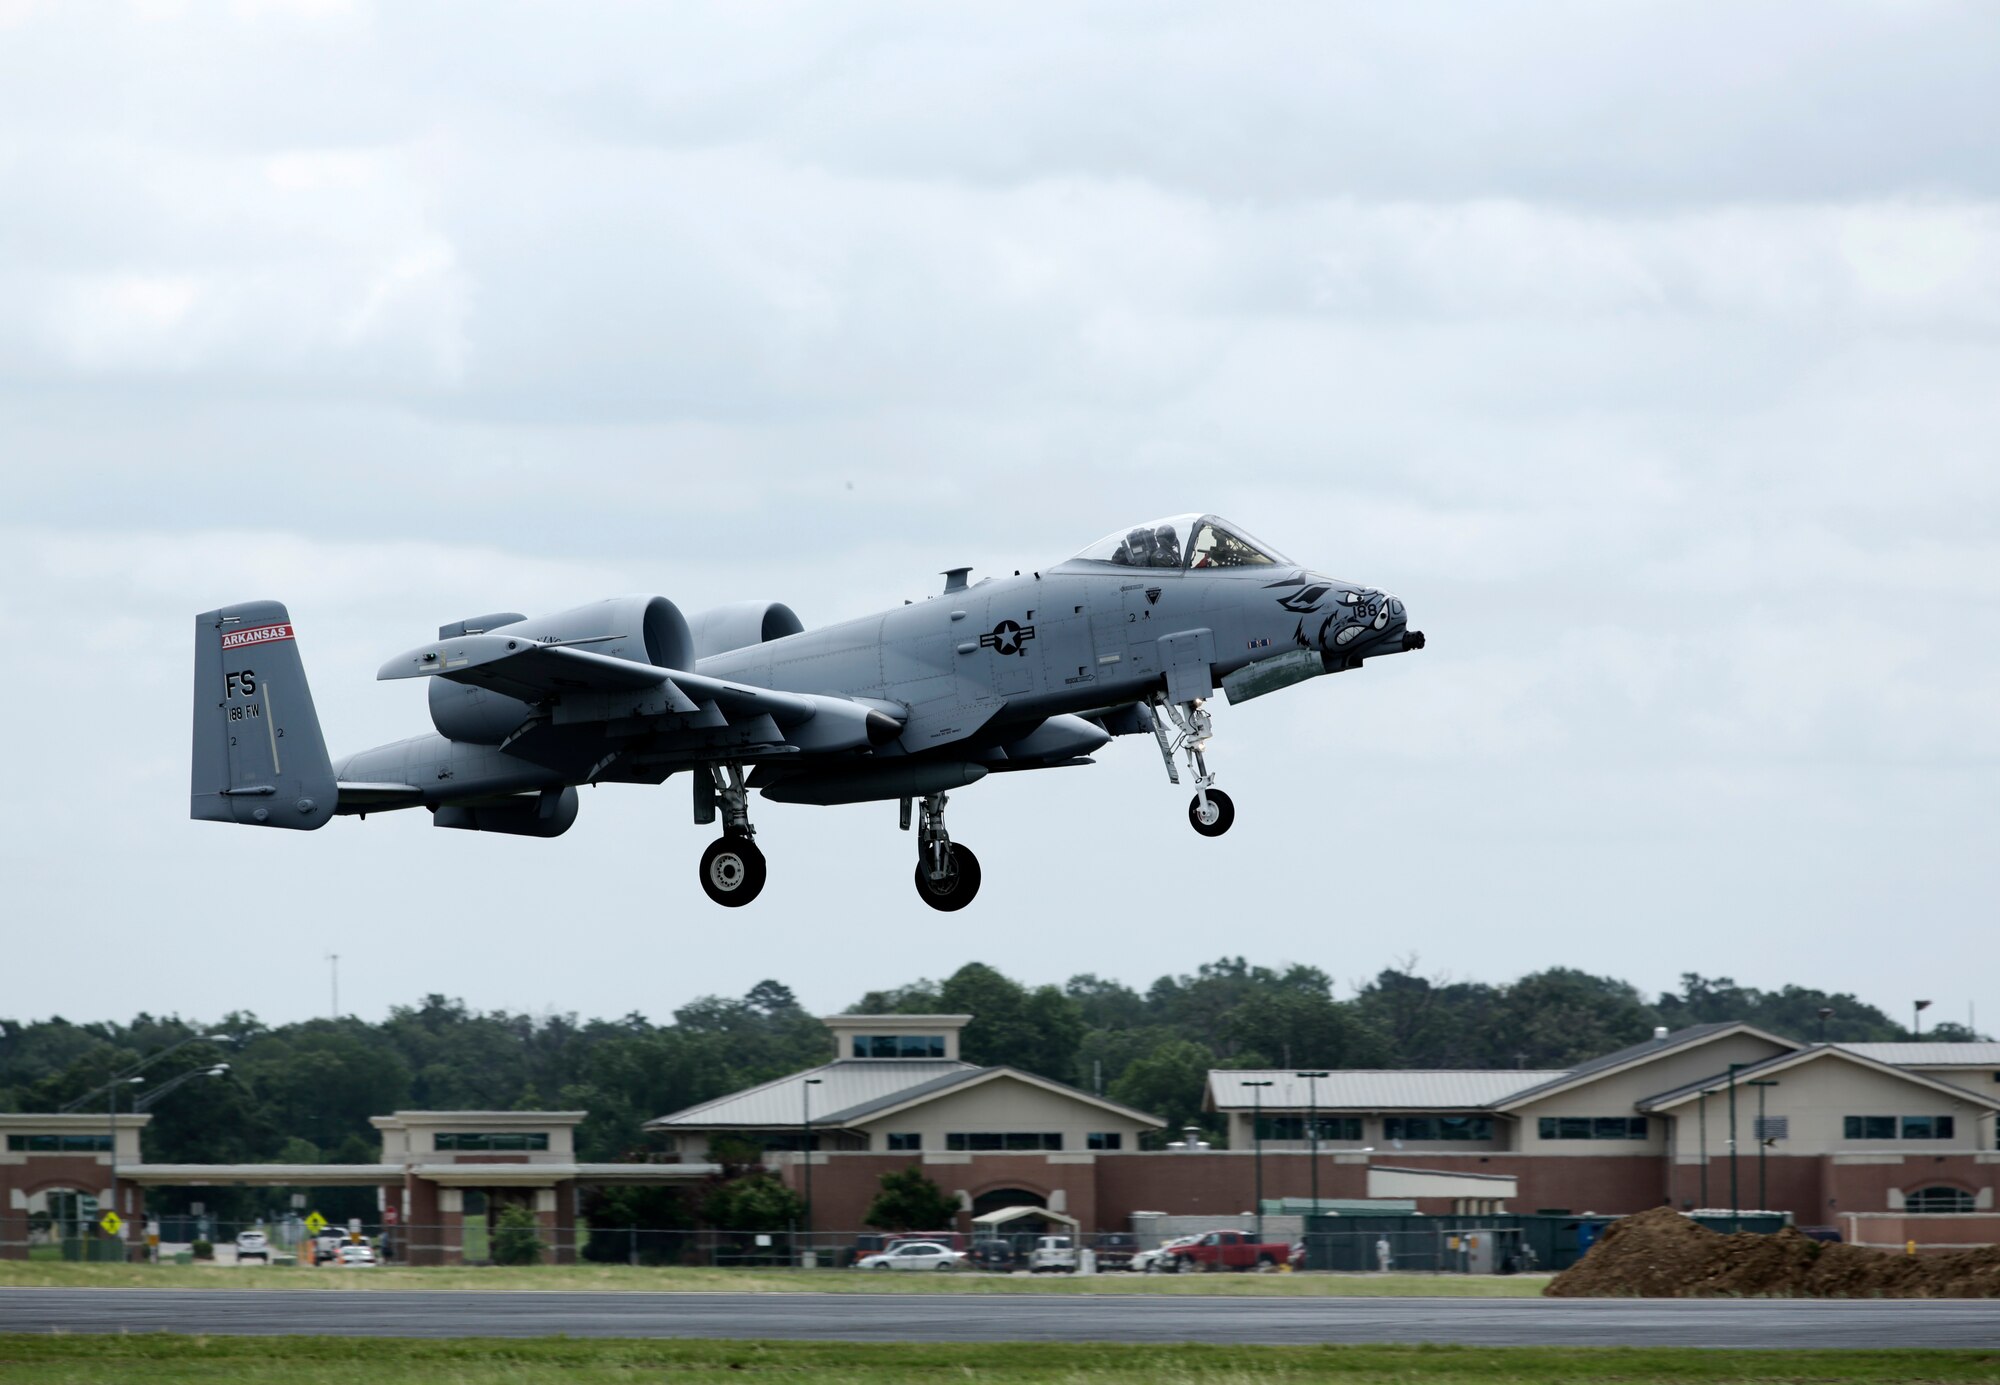 Two 188th Wing A-10C Thunderbolt II “Warthogs” piloted by Col. Mark Anderson, 188th Wing commander, and Maj. Doug Davis, 188th Detachment 1 commander, take off from Ebbing Air National Guard Base, Fort Smith, Arkansas, June 7, 2014. This sortie marked the wing’s final A-10 departure and capped the 188th’s Conversion Day ceremony, which recognized the many changes occurring at the wing as a result of its conversion to a remotely piloted aircraft (MQ-9 Reapers) and intelligence, surveillance and reconnaissance mission. The 188th Fighter Wing was also redesignated as the 188th Wing during the event. (U.S. Air National Guard photo by Master Sgt. Mark Moore)